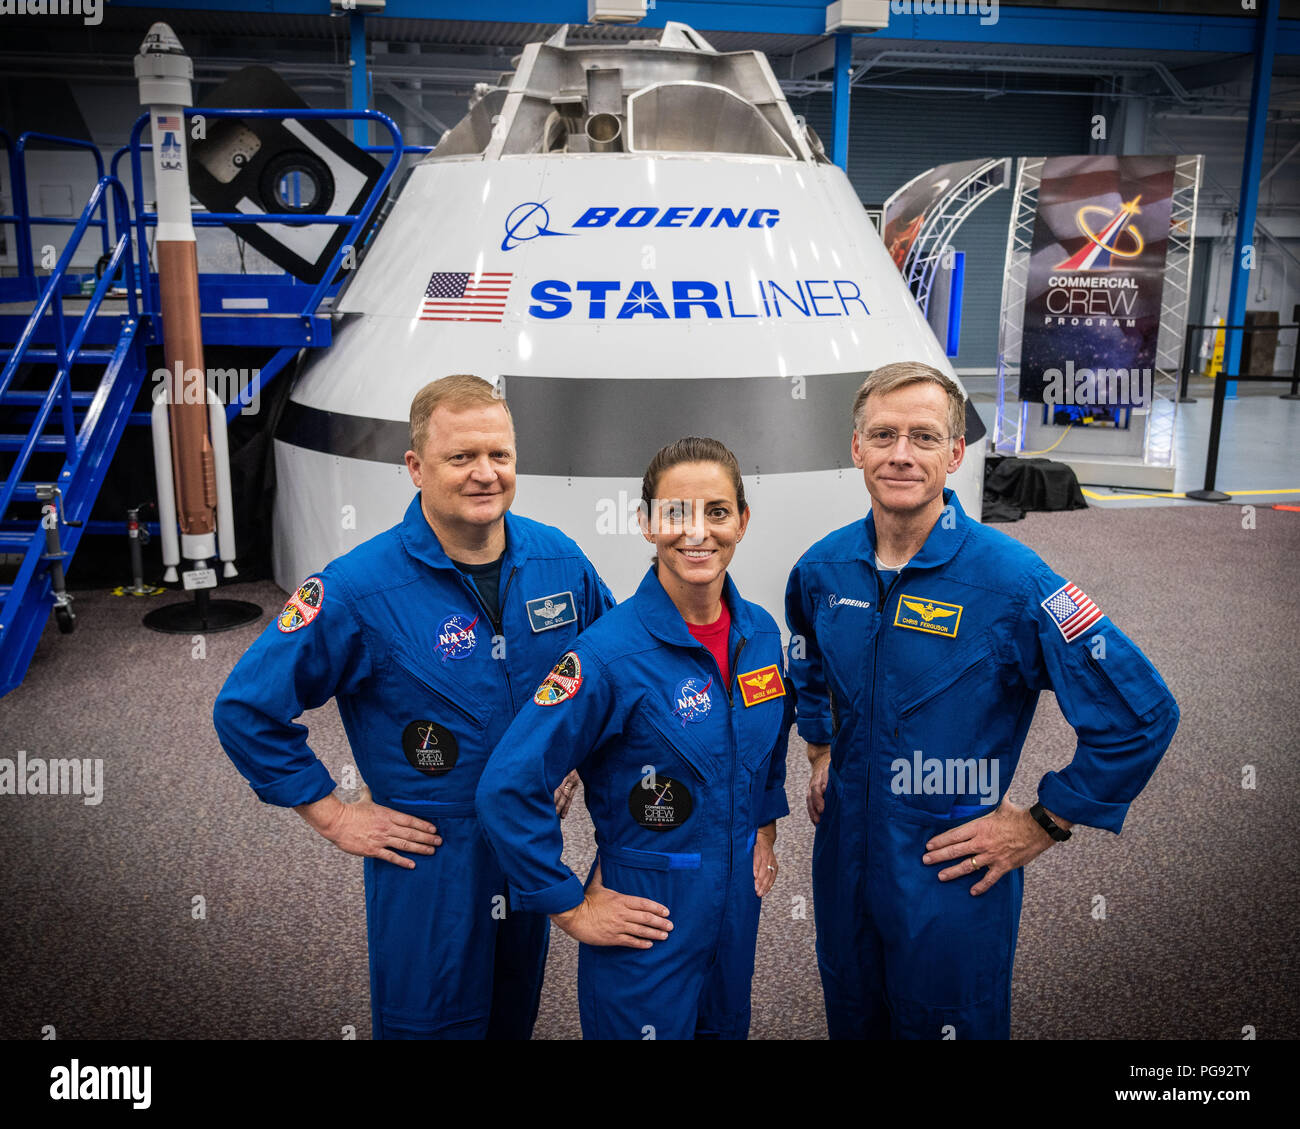 From left NASA astronauts Eric Boe and Nicole Mann, along with Boeing astronaut Chris Ferguson, gathered in front of the Boeing Mockup Trainer at NASA’s Johnson Space Center in Houston, Texas on Aug. 2, 2018 ahead of the commercial crew flight assignments announcement Aug. 3. The three were assigned to launch aboard Boeing’s CST-100 Starliner on the company’s Crew Flight Test targeted for mid-2019 in partnership with NASA’s Commercial Crew Program. Stock Photo